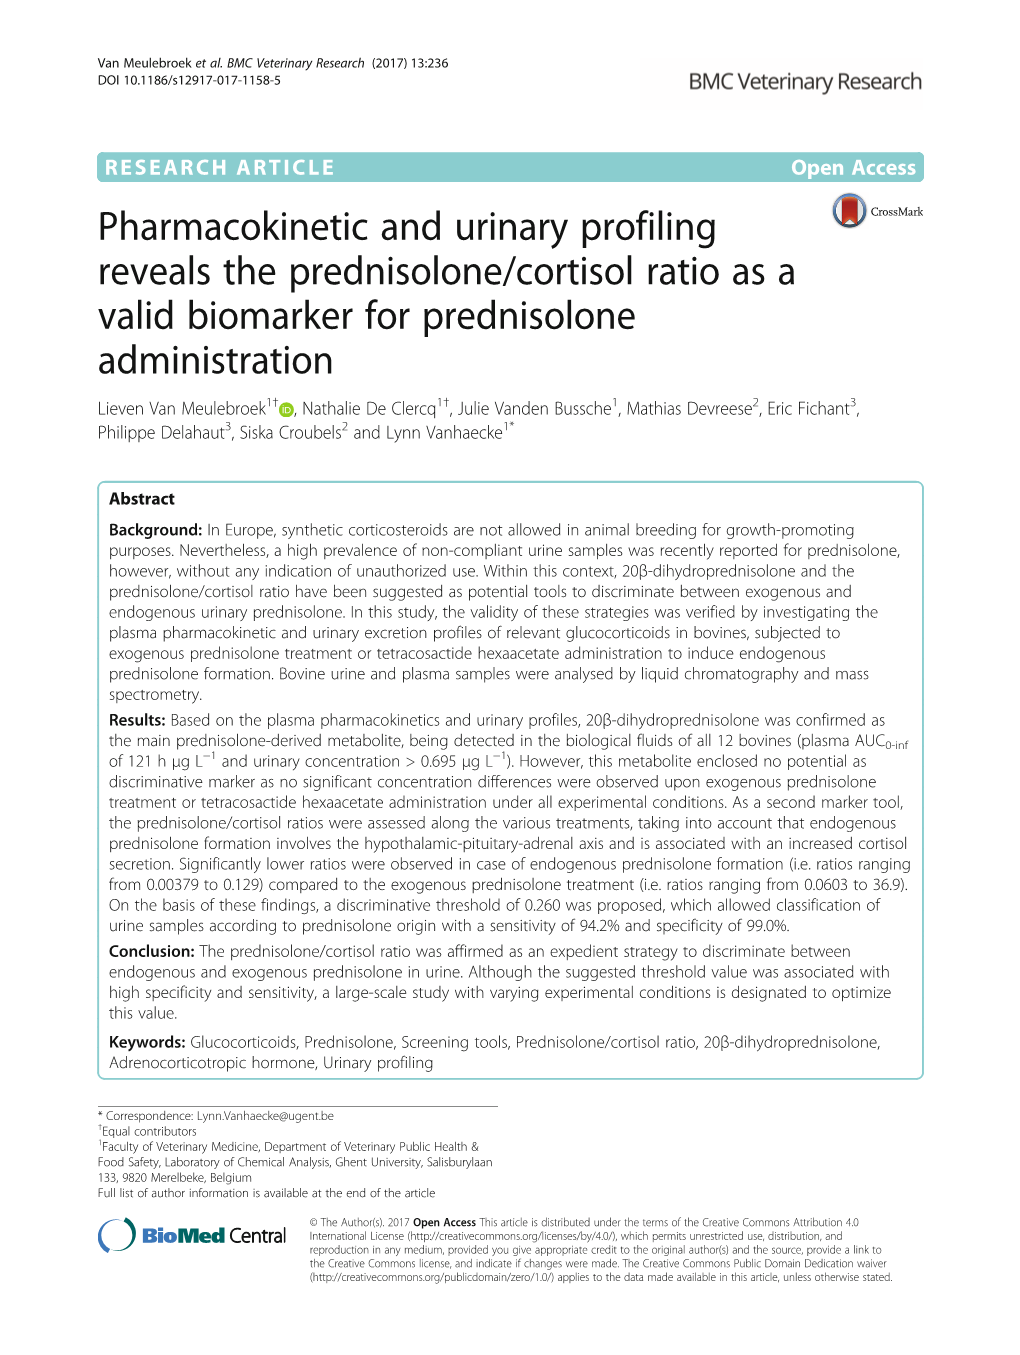 Pharmacokinetic and Urinary Profiling Reveals the Prednisolone/Cortisol